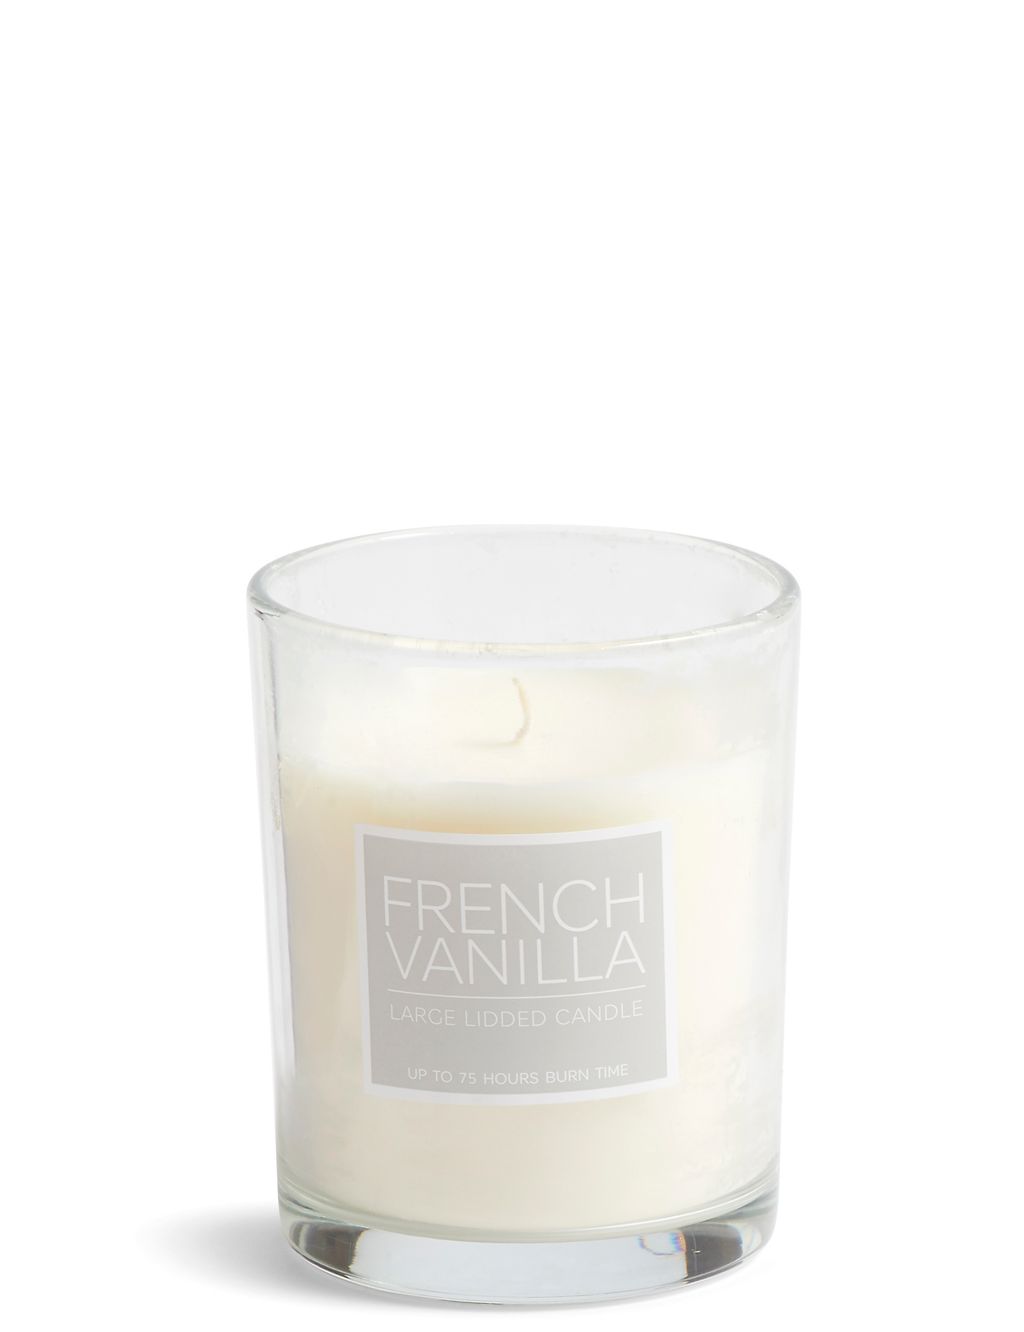 French Vanilla Large Lidded Scented Candle 1 of 4